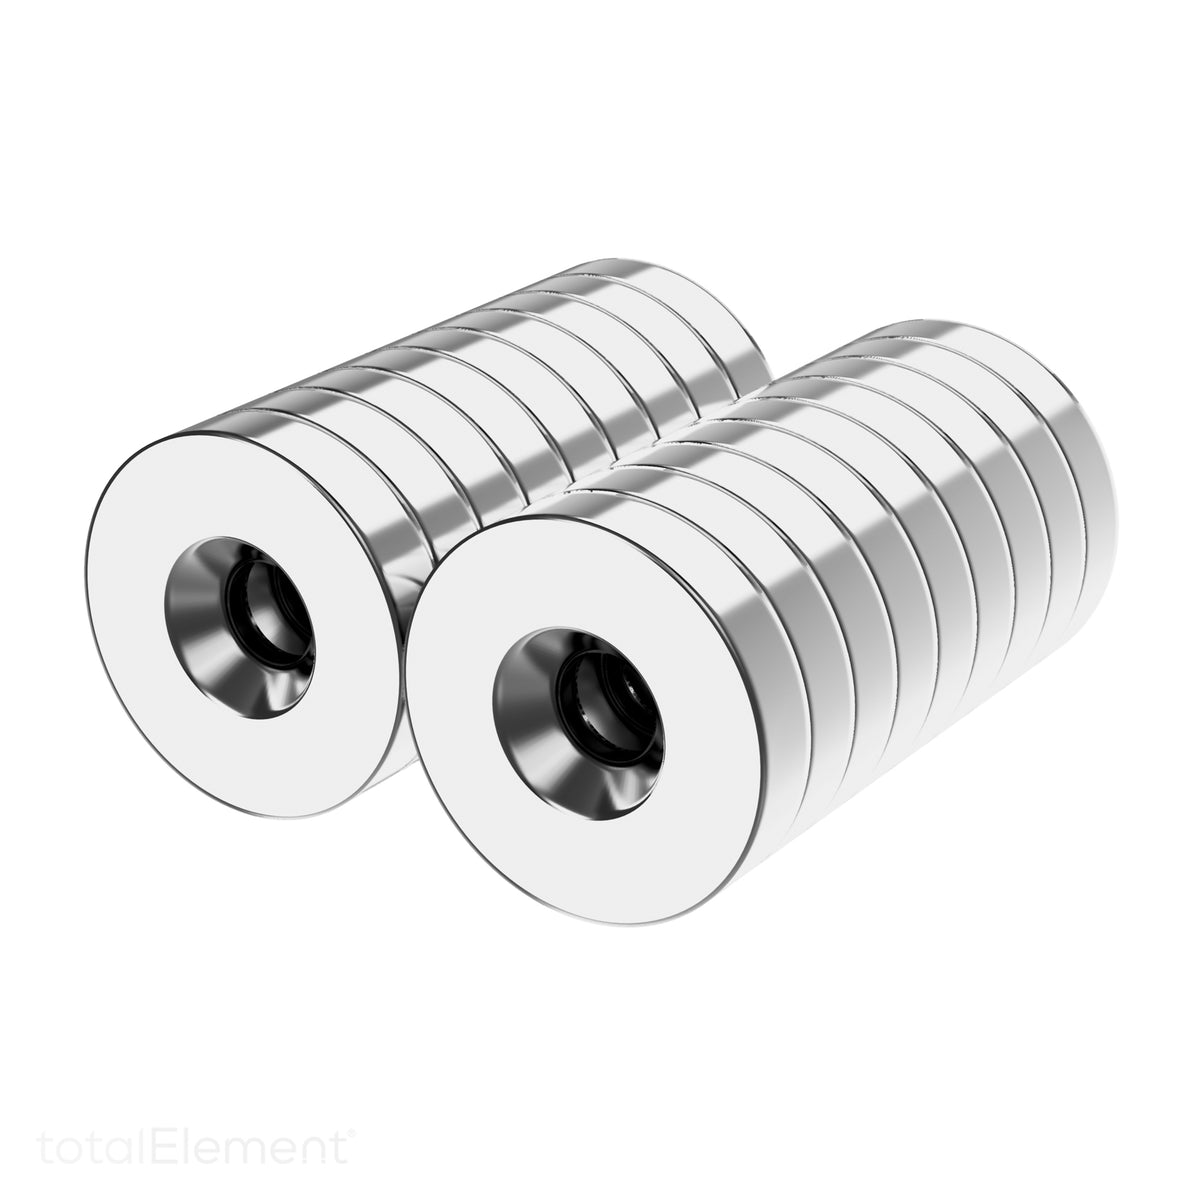 Neodymium Countersunk Ring Magnets 20mm x 3mm x 5mm Hole N35 Strong Disc Screw 